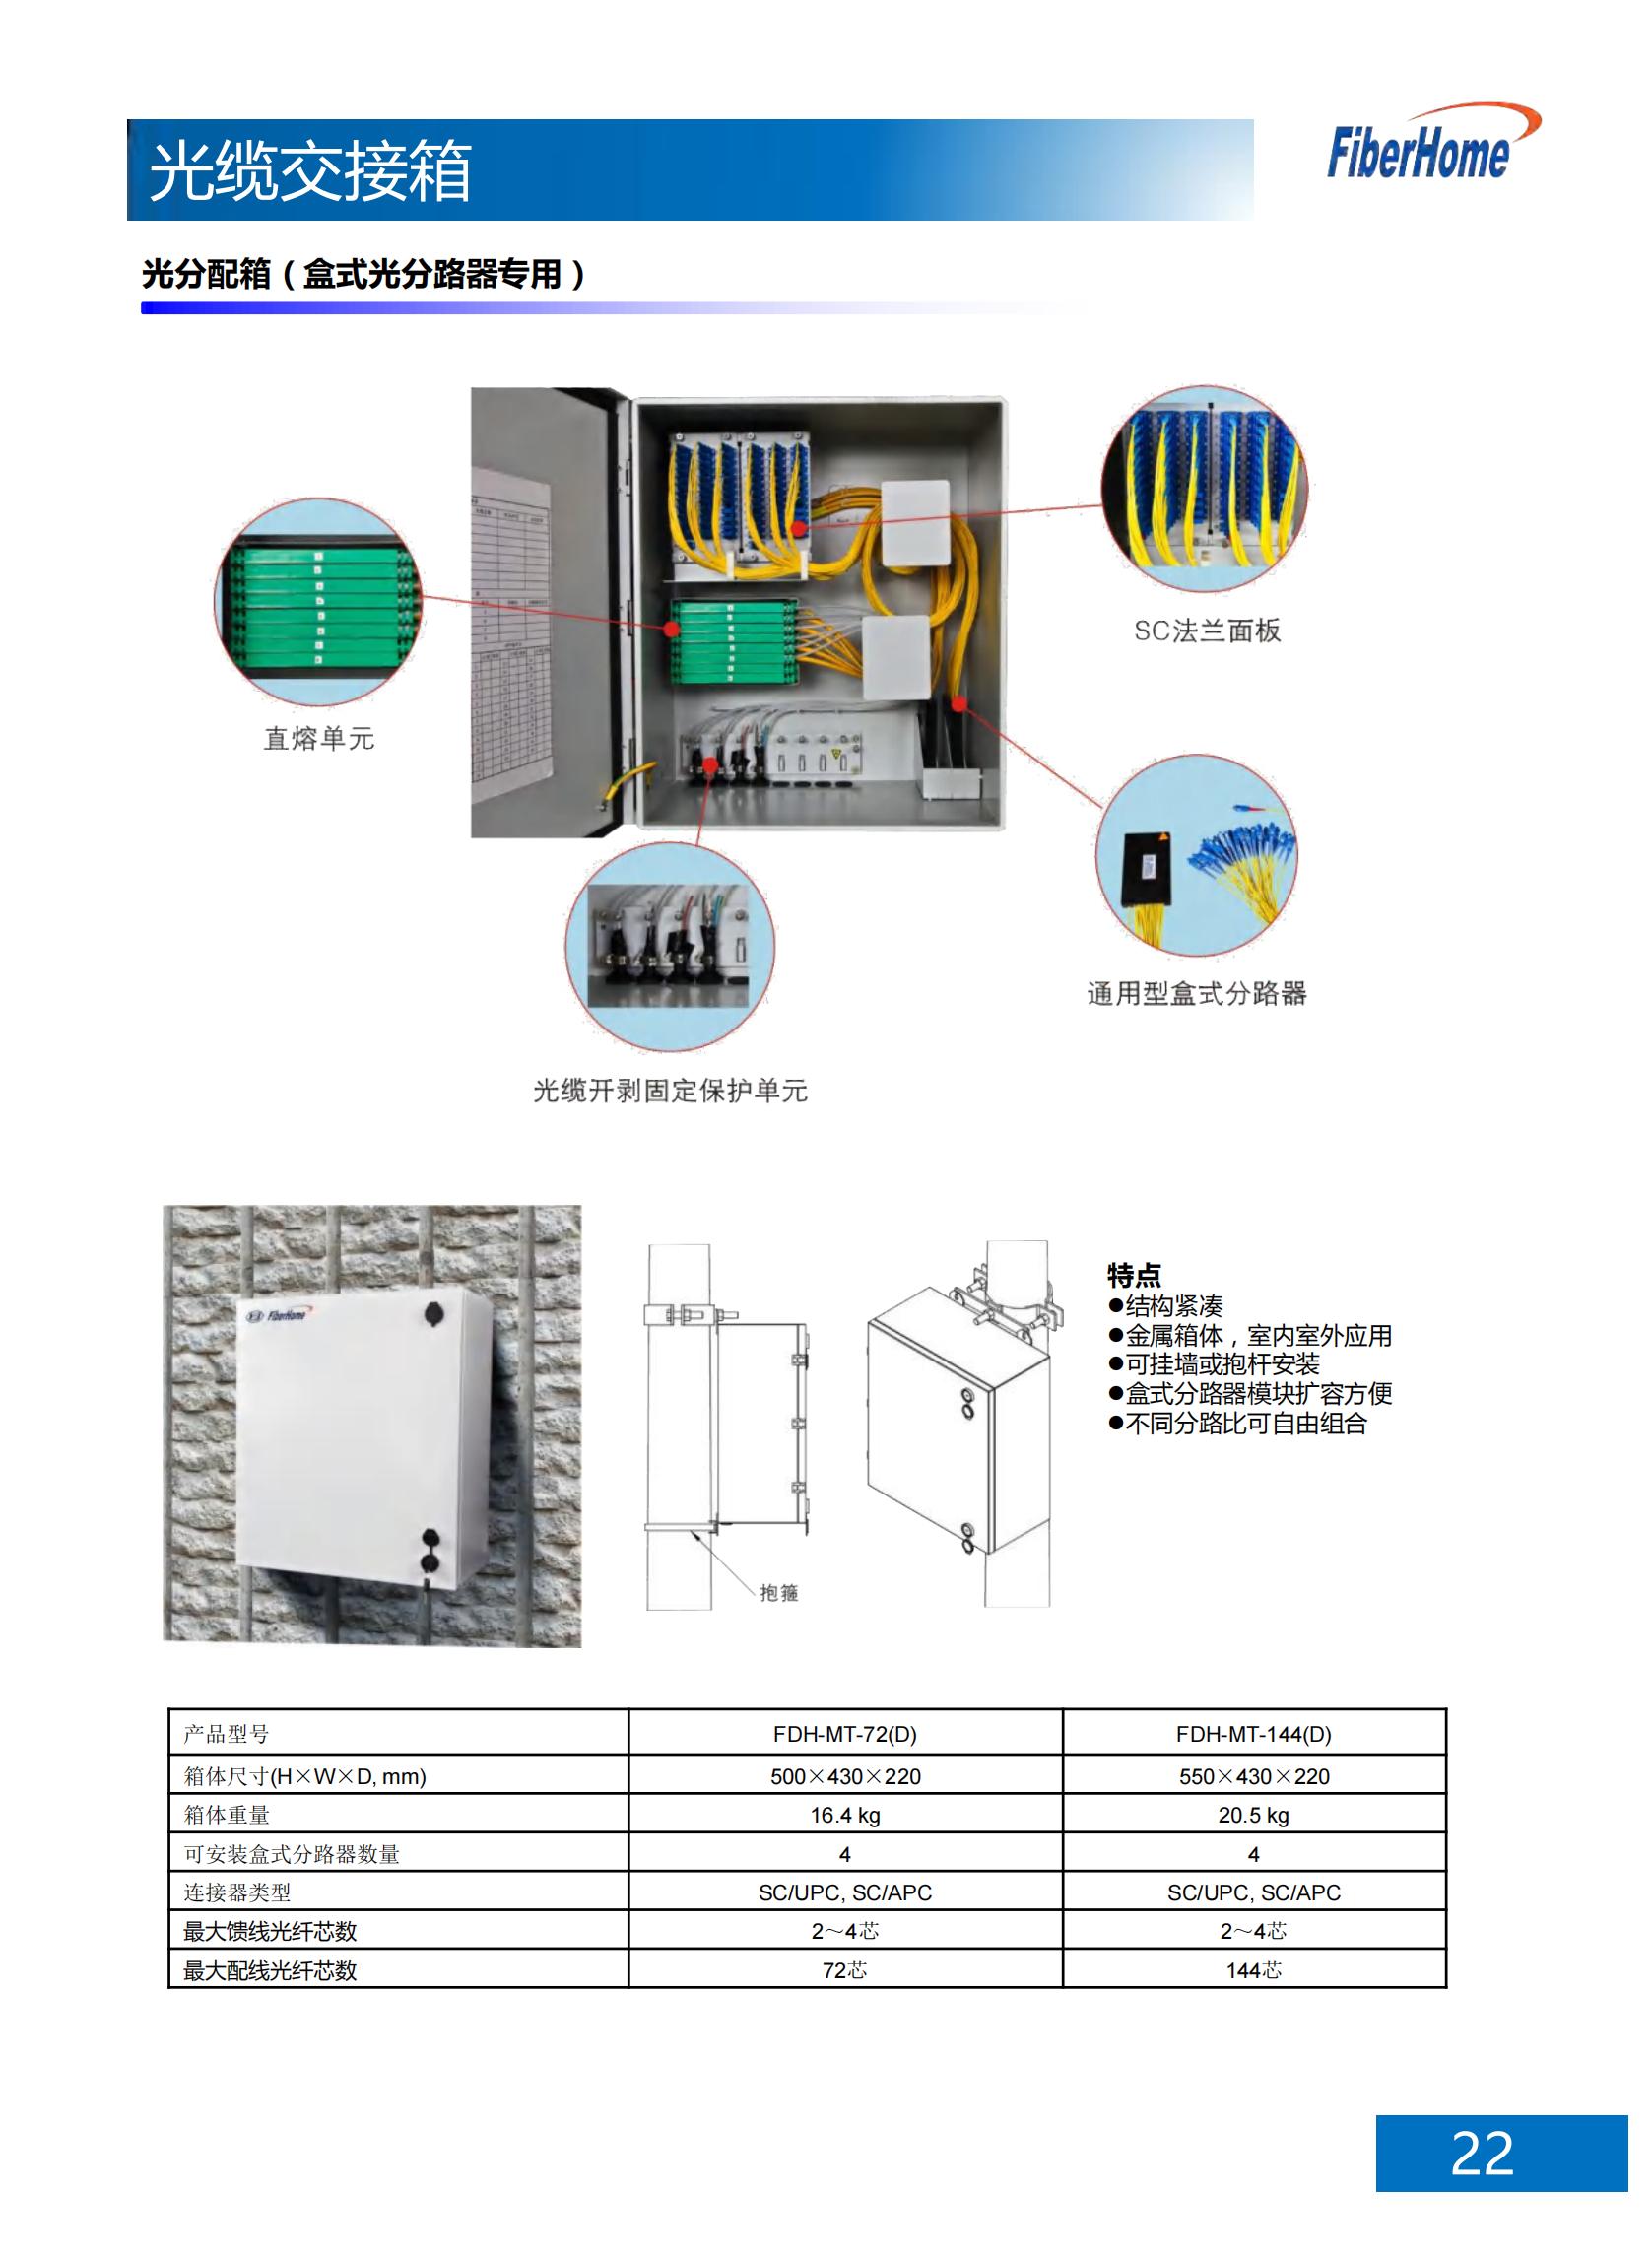 96-core optical cable transfer box wall-mounted